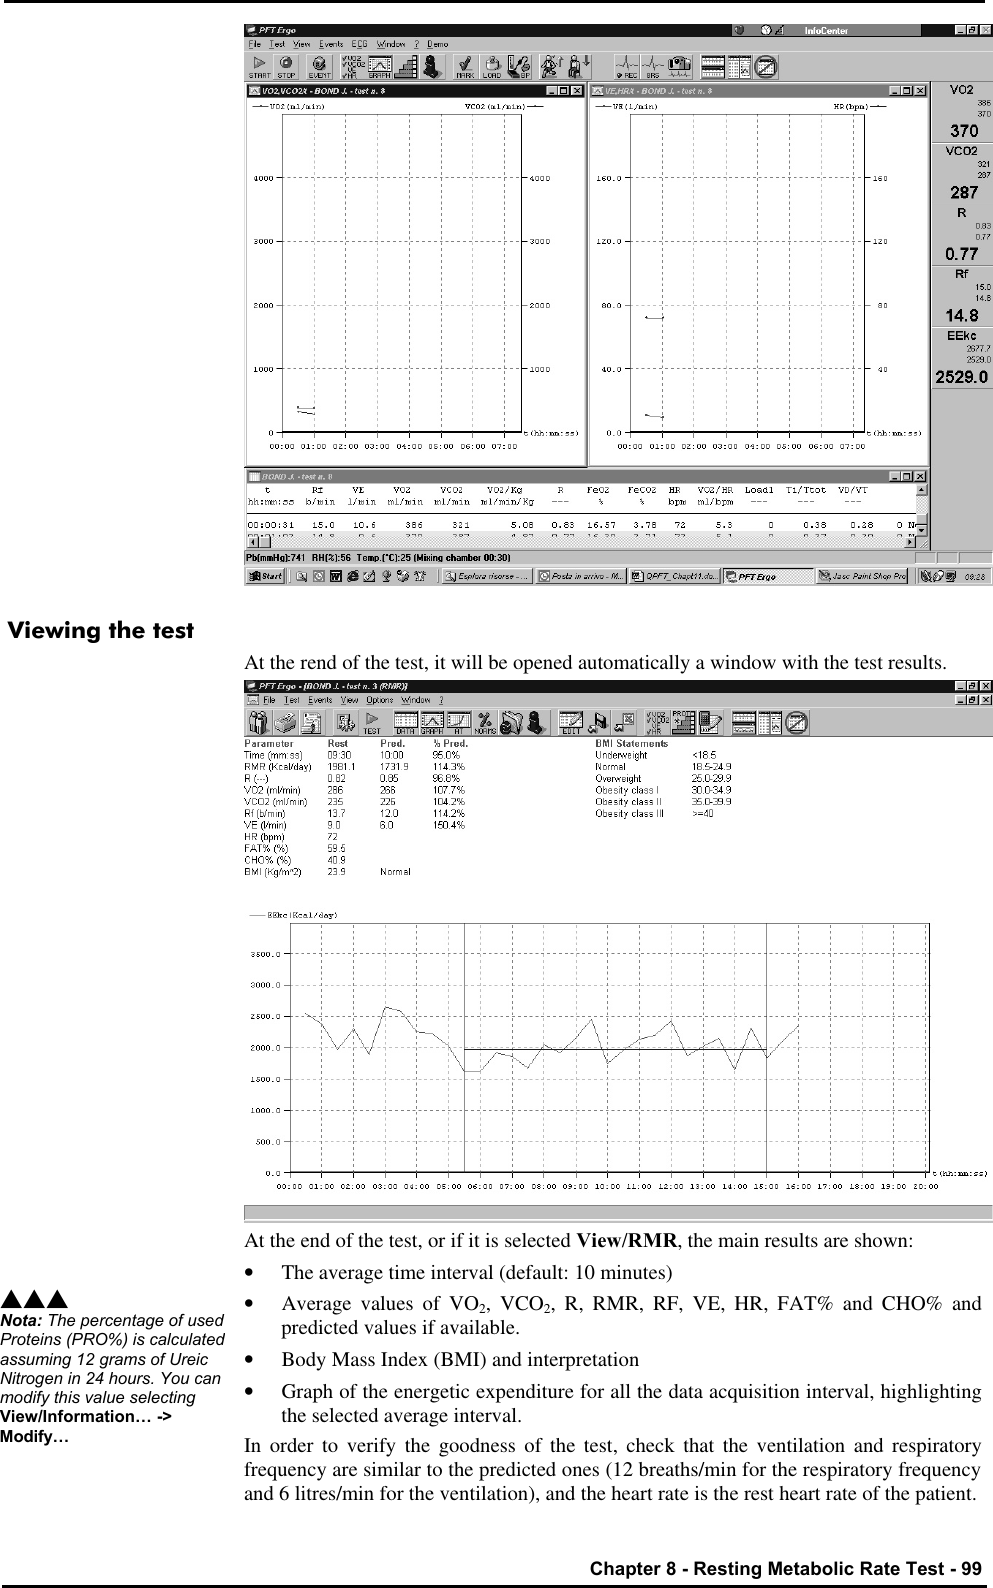   Chapter 8 - Resting Metabolic Rate Test - 99  Viewing the test At the rend of the test, it will be opened automatically a window with the test results.  At the end of the test, or if it is selected View/RMR, the main results are shown: • The average time interval (default: 10 minutes) • Average values of VO2, VCO2, R, RMR, RF, VE, HR, FAT% and CHO% and predicted values if available. • Body Mass Index (BMI) and interpretation • Graph of the energetic expenditure for all the data acquisition interval, highlighting the selected average interval. In order to verify the goodness of the test, check that the ventilation and respiratory frequency are similar to the predicted ones (12 breaths/min for the respiratory frequency and 6 litres/min for the ventilation), and the heart rate is the rest heart rate of the patient. sss Nota: The percentage of used Proteins (PRO%) is calculated assuming 12 grams of Ureic Nitrogen in 24 hours. You can modify this value selecting View/Information… -&gt; Modify… 